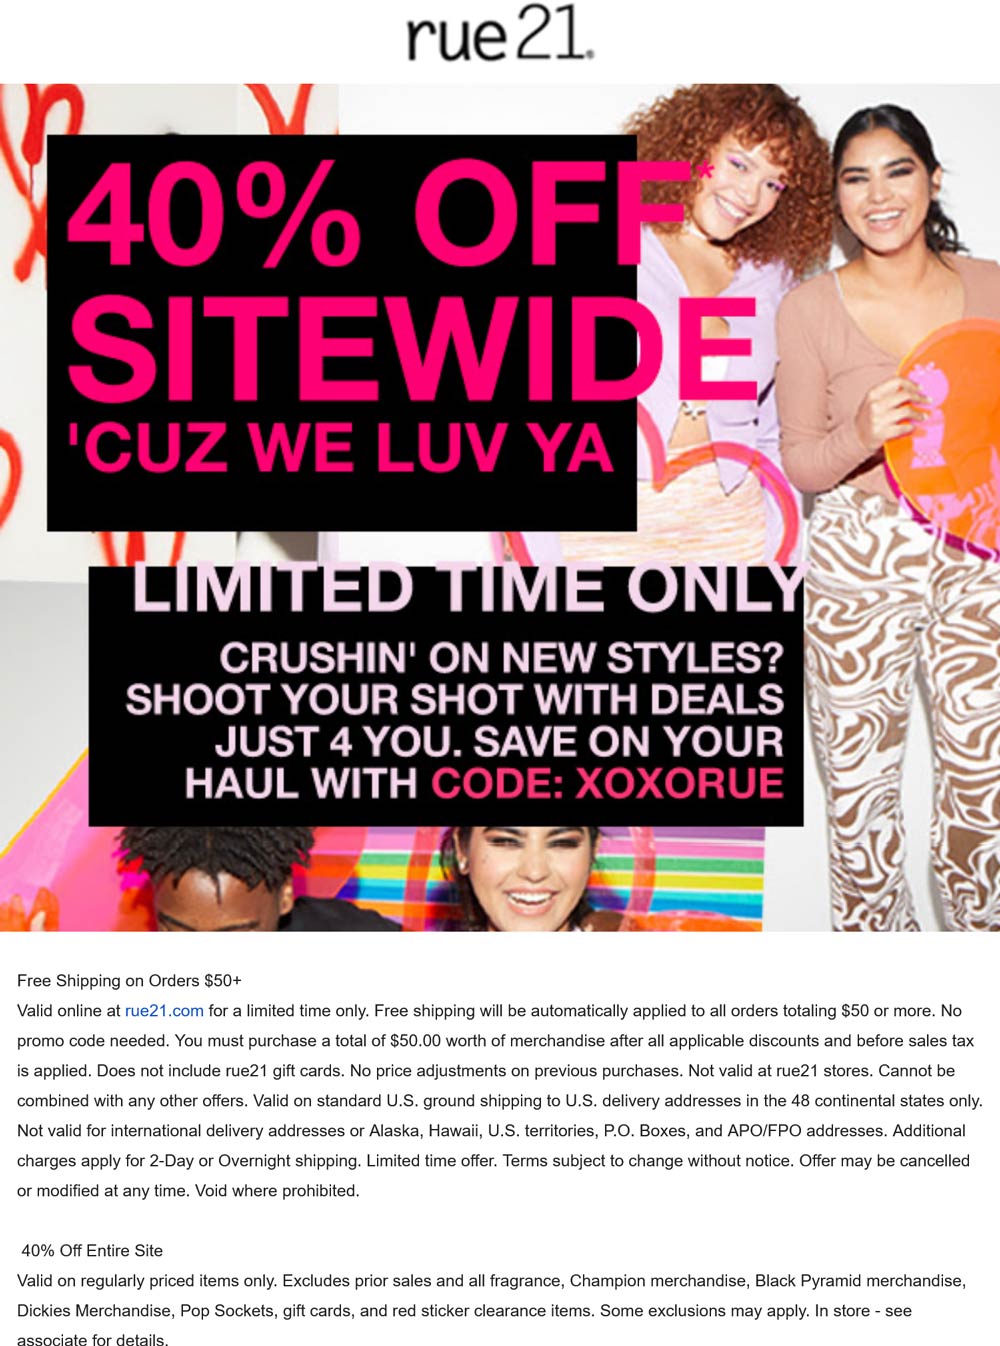 rue21 stores Coupon  40% off everything online today at rue21 #rue21 